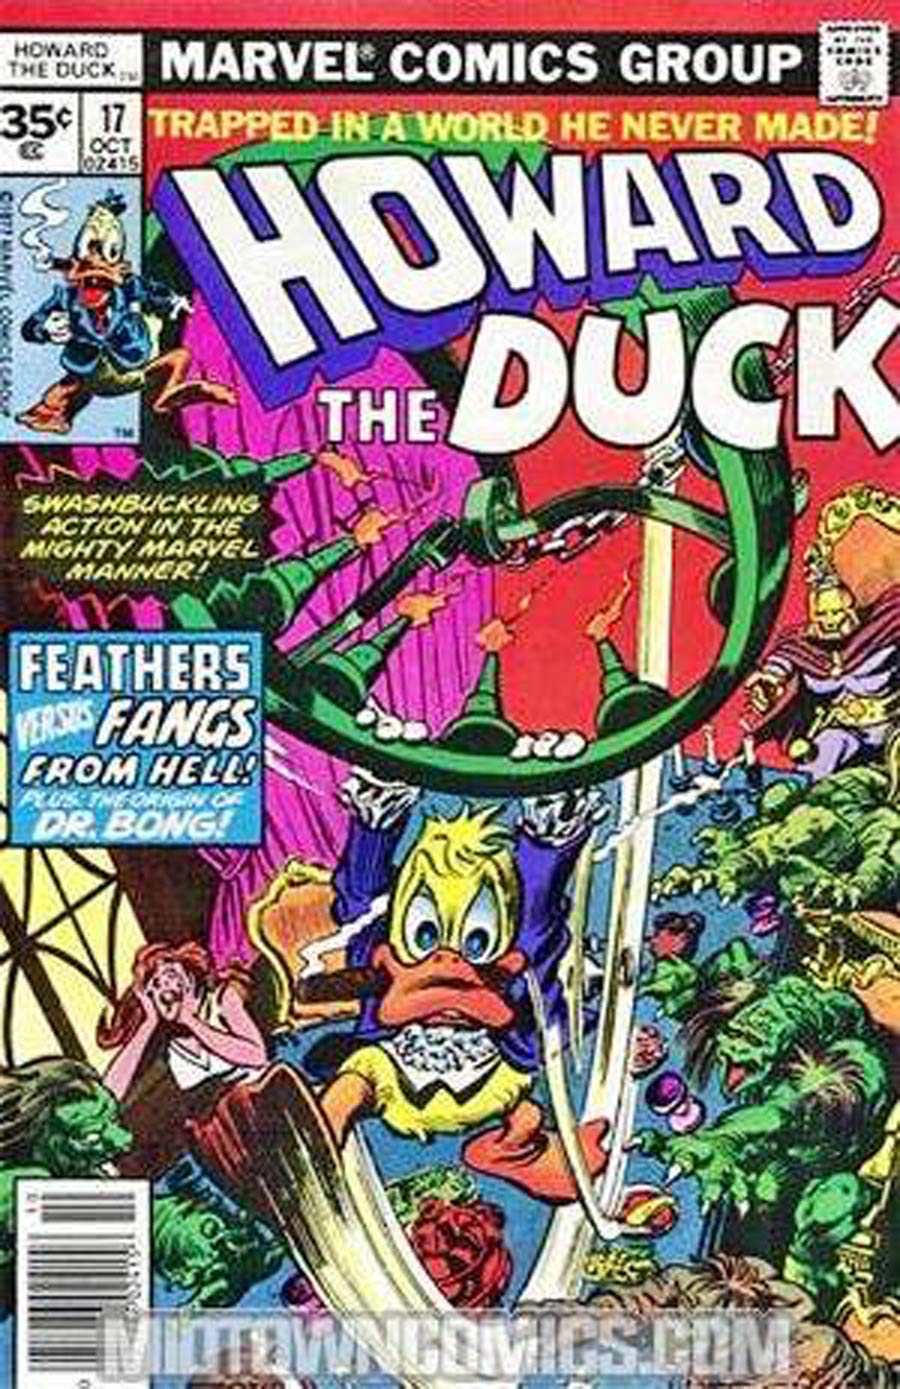 Howard The Duck Vol 1 #17 Cover B 35-Cent Variant Edition